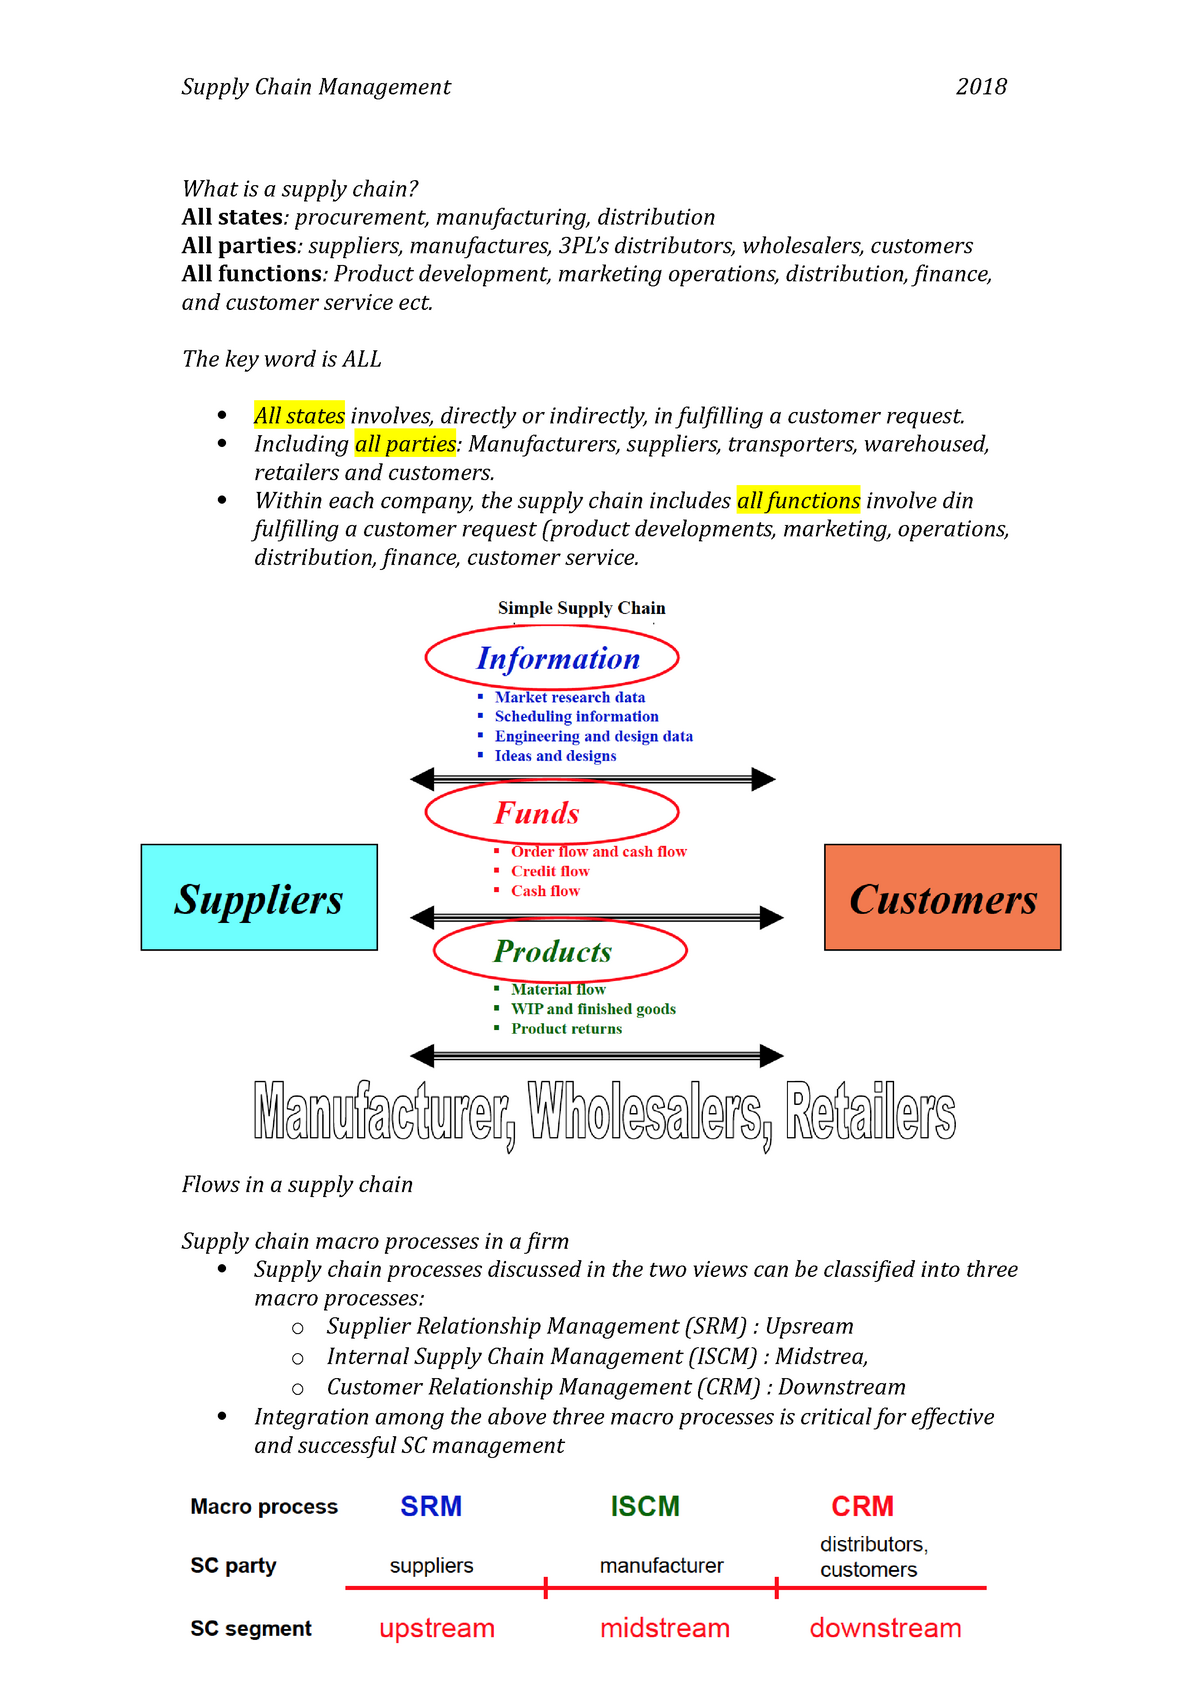 supply chain management business plan pdf notes